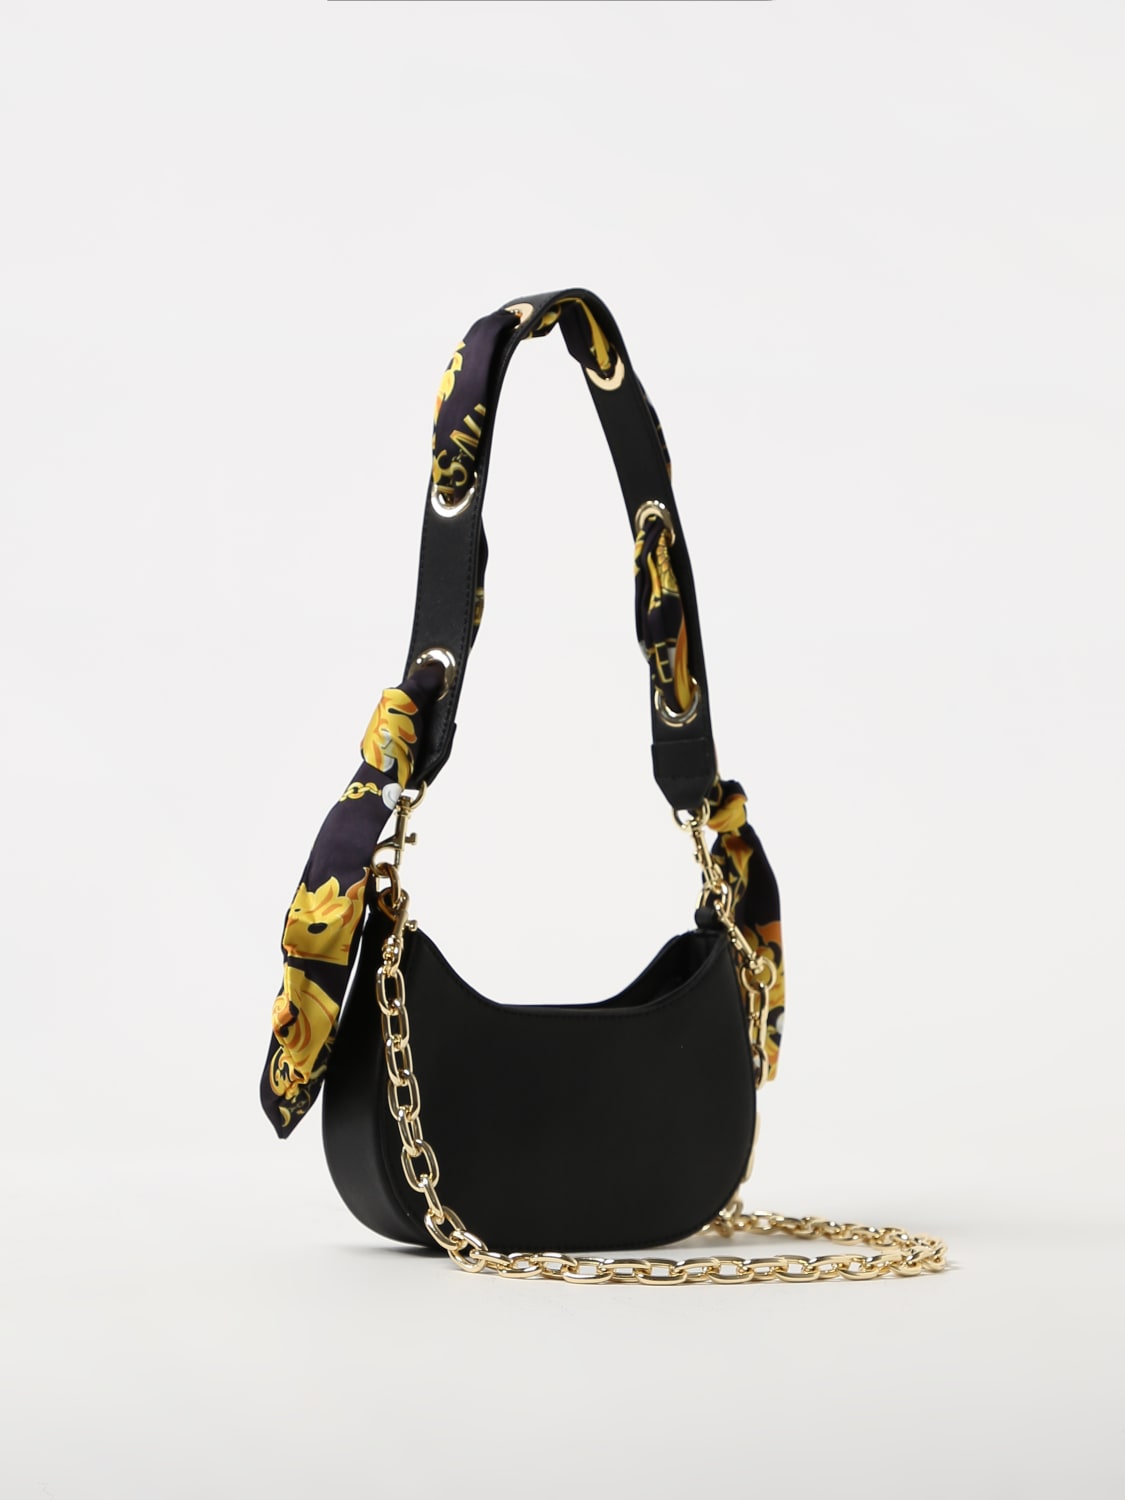 Versace Jeans Couture bag in synthetic saffiano leather